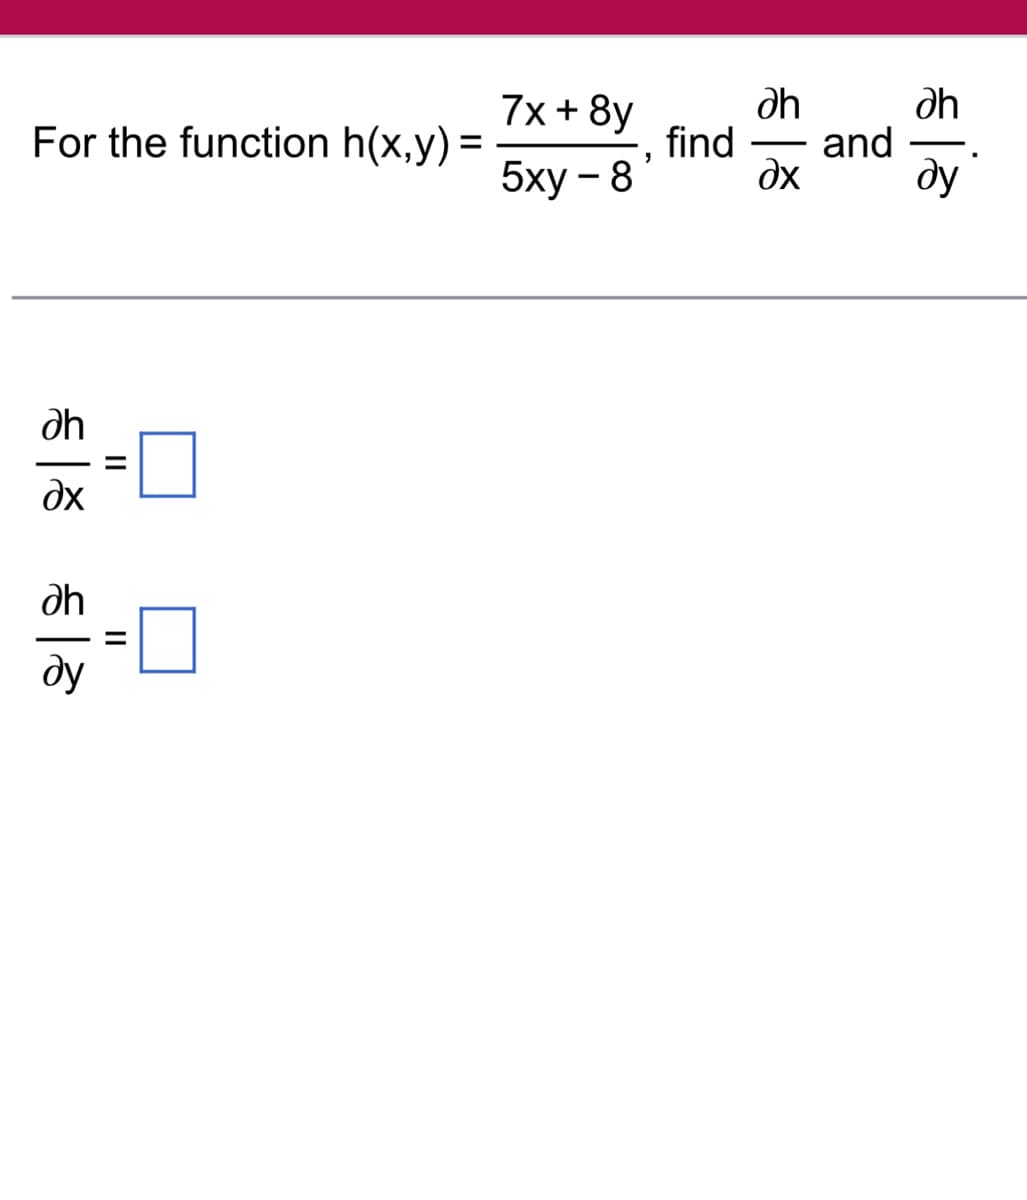 For the function h(x,y) =
Əh
дх
dh
ду
||
||
7x+8y
5xy – 8
,
dh
find and
дх
əh